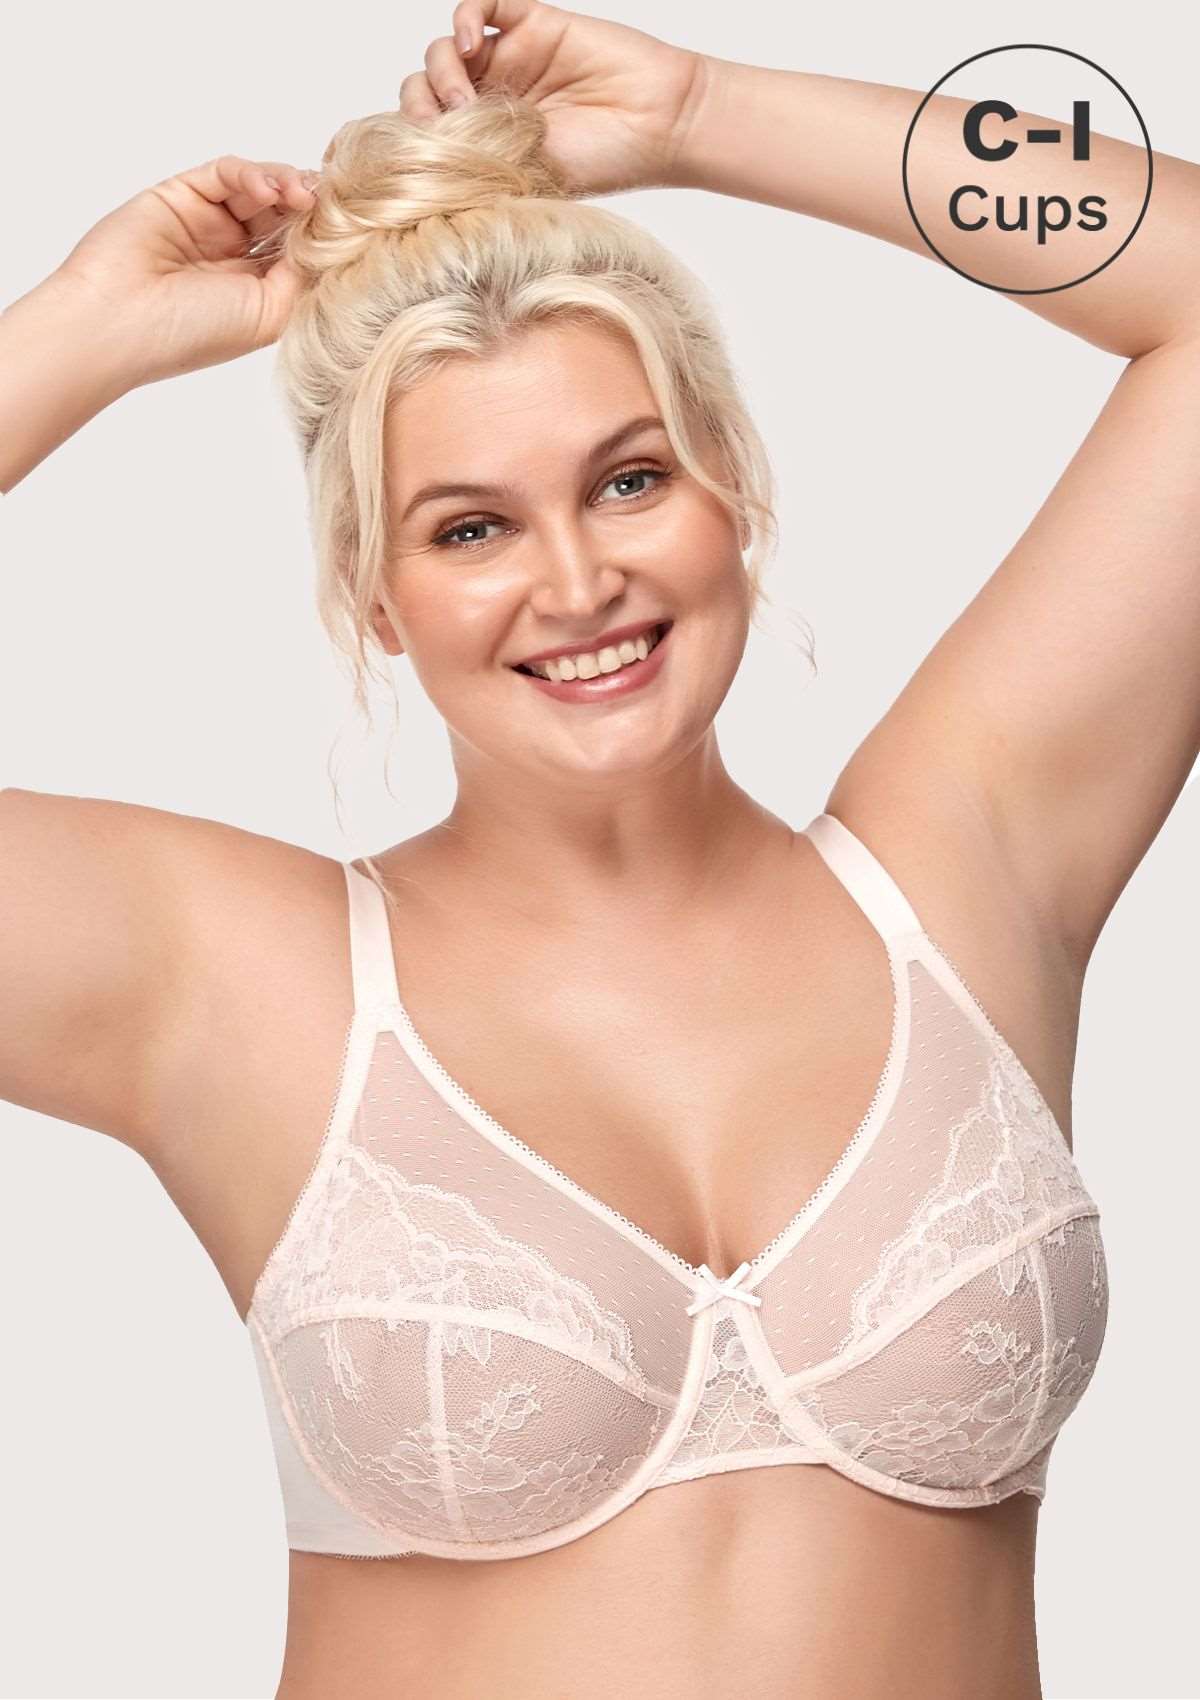 HSIA Enchante Lacy Bra: Comfy Sheer Lace Bra With Lift - Pink / 38 / H